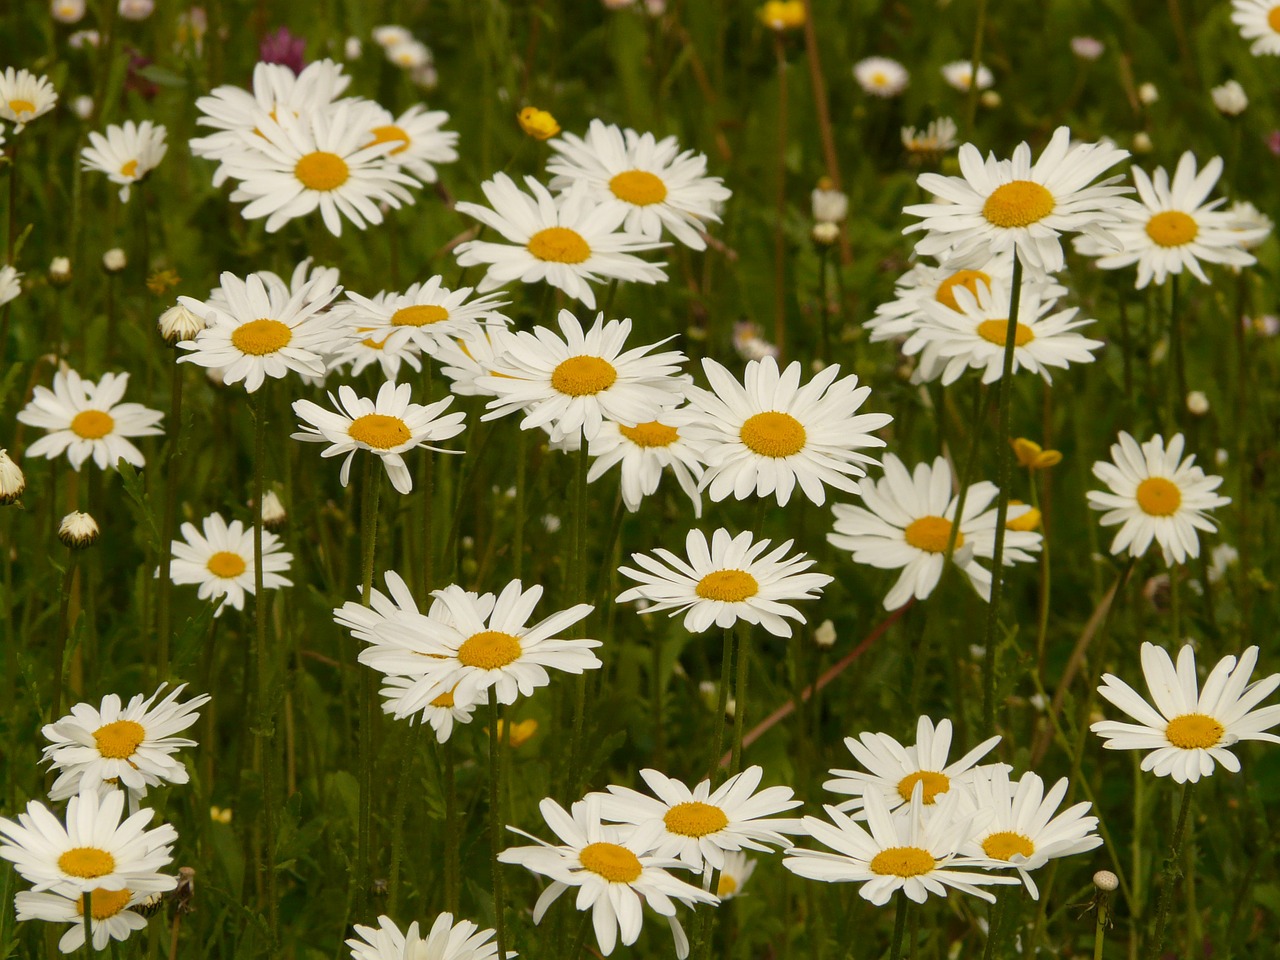 meadows margerite meadow margerite paid feverfew free photo